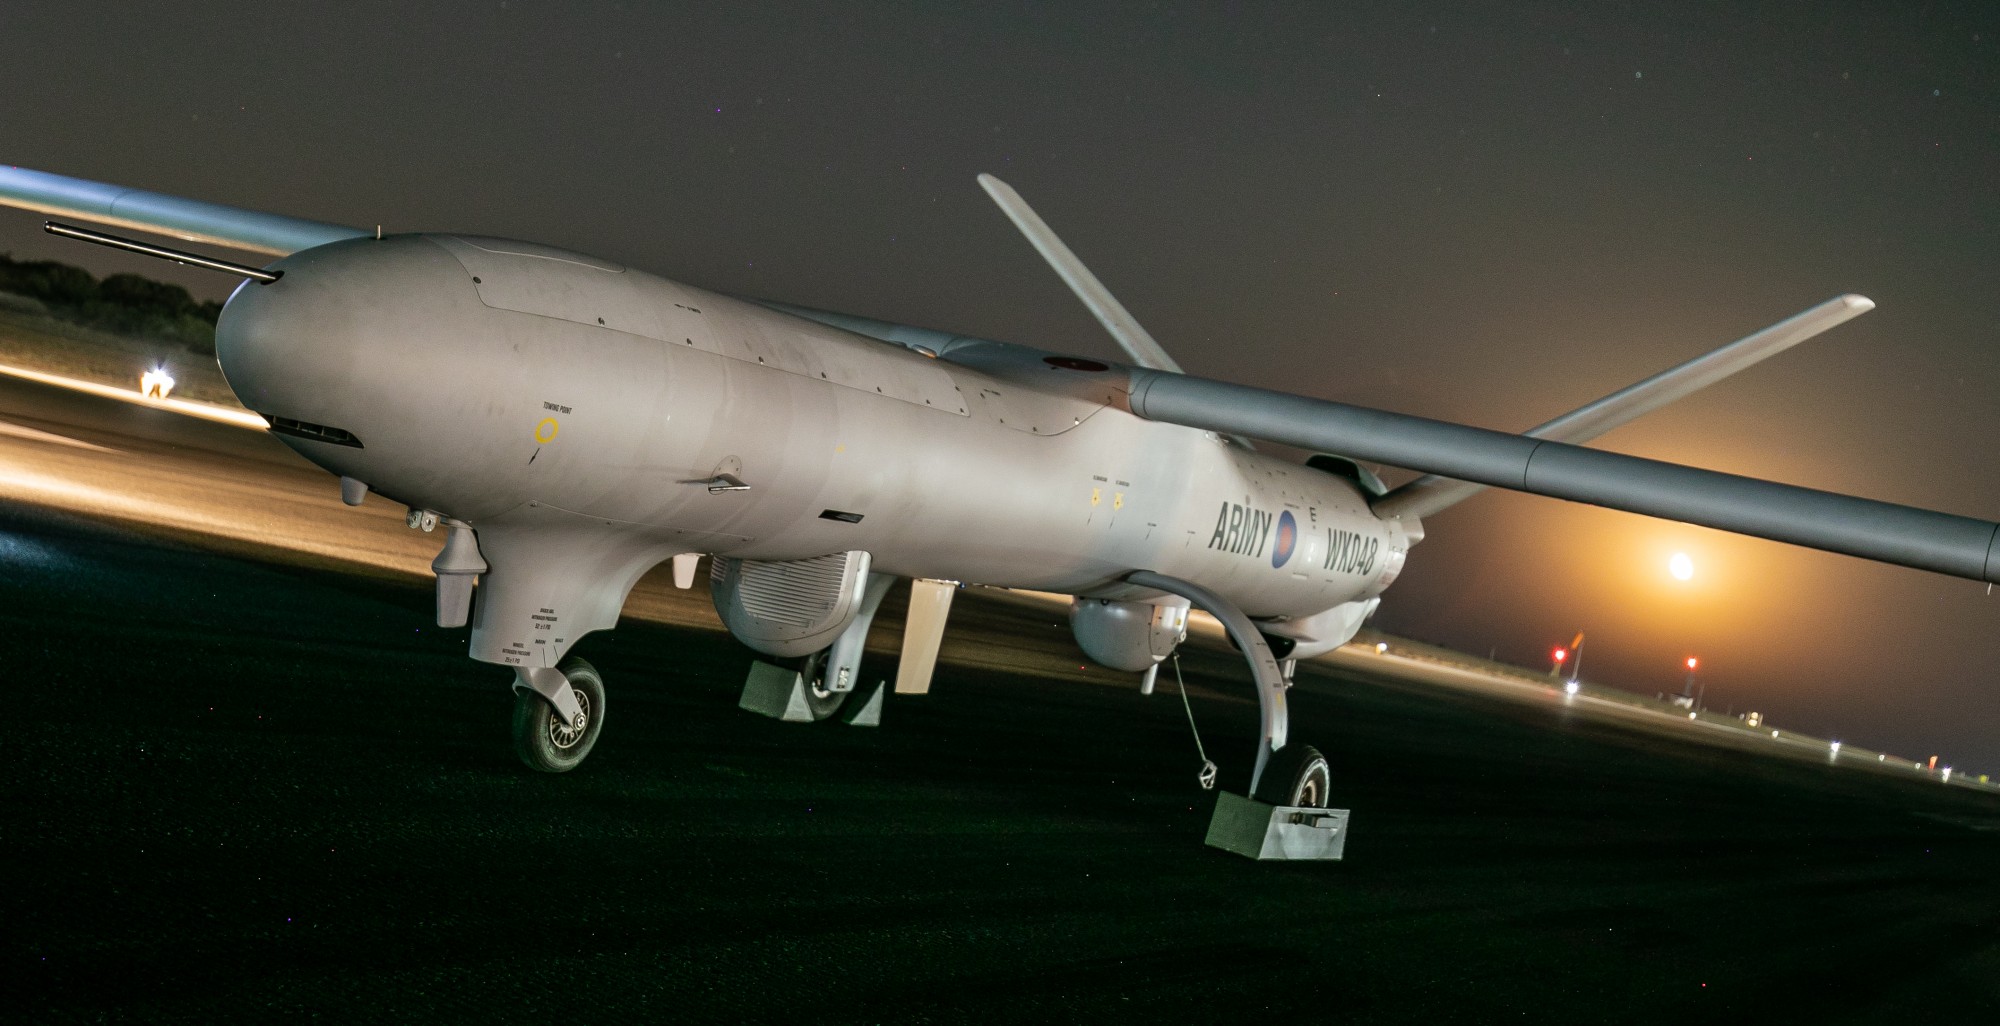 he British Army’s Watchkeeper Unmanned Aerial System being prepared and launched from RAF Akrotiri.